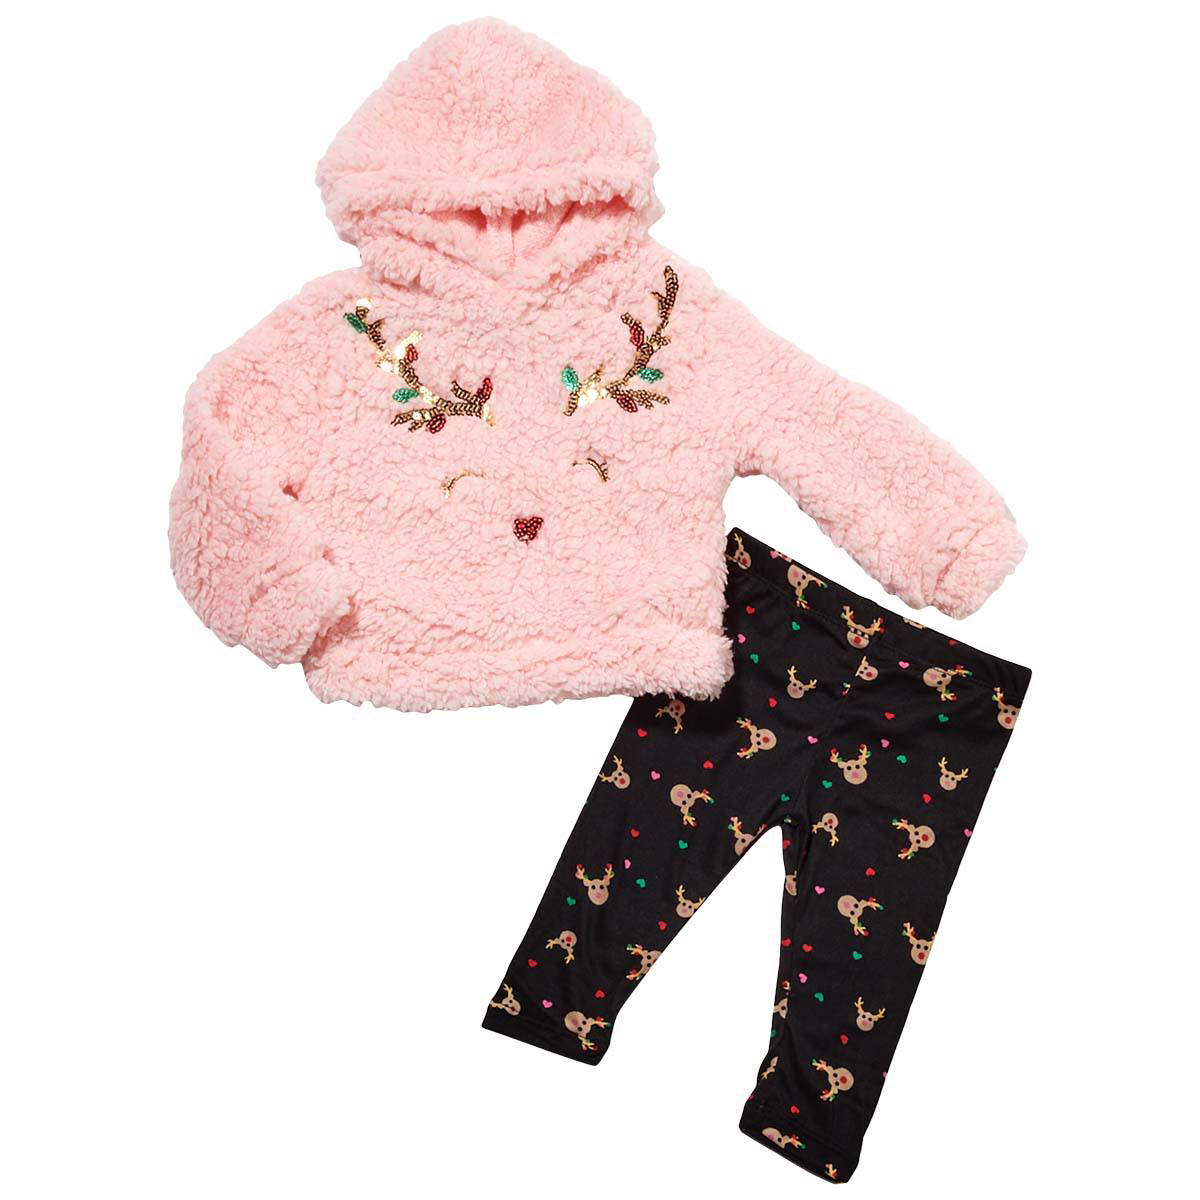 Baby Girl (12-24M) Colette Lilly 2pc. Reindeer Hooded Set